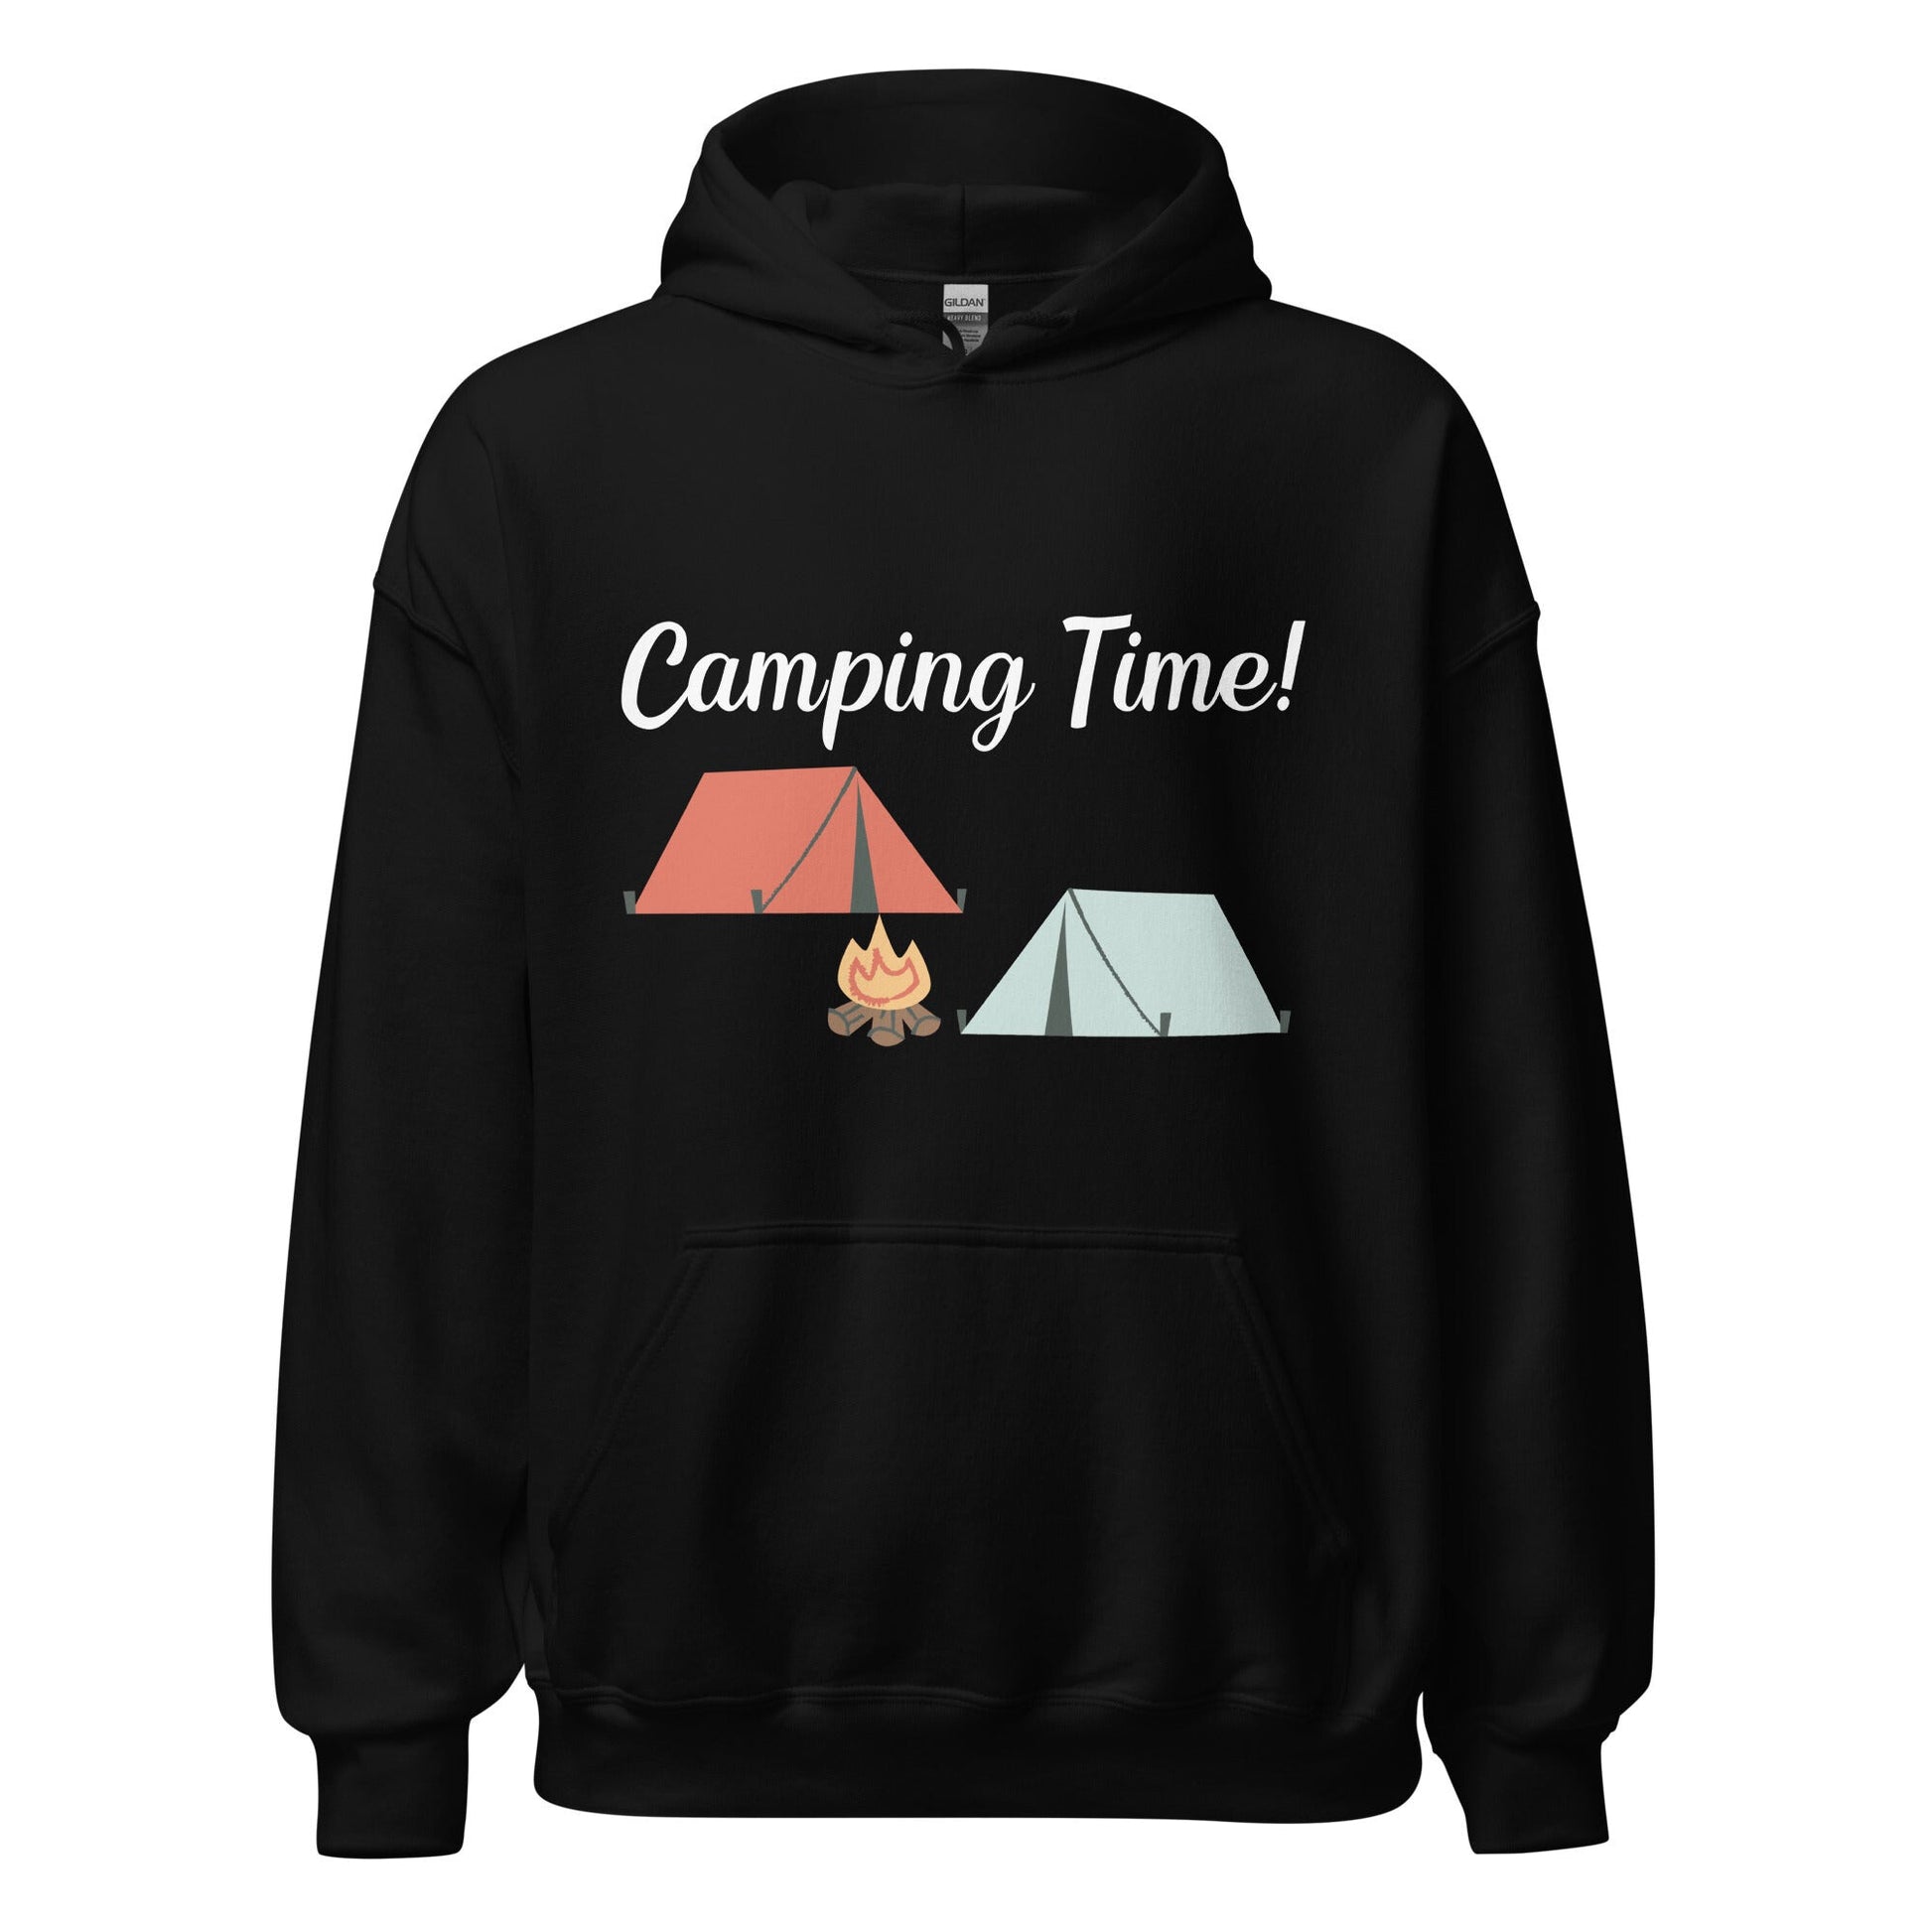 Camp in Style With This Unisex Camping Hoodie